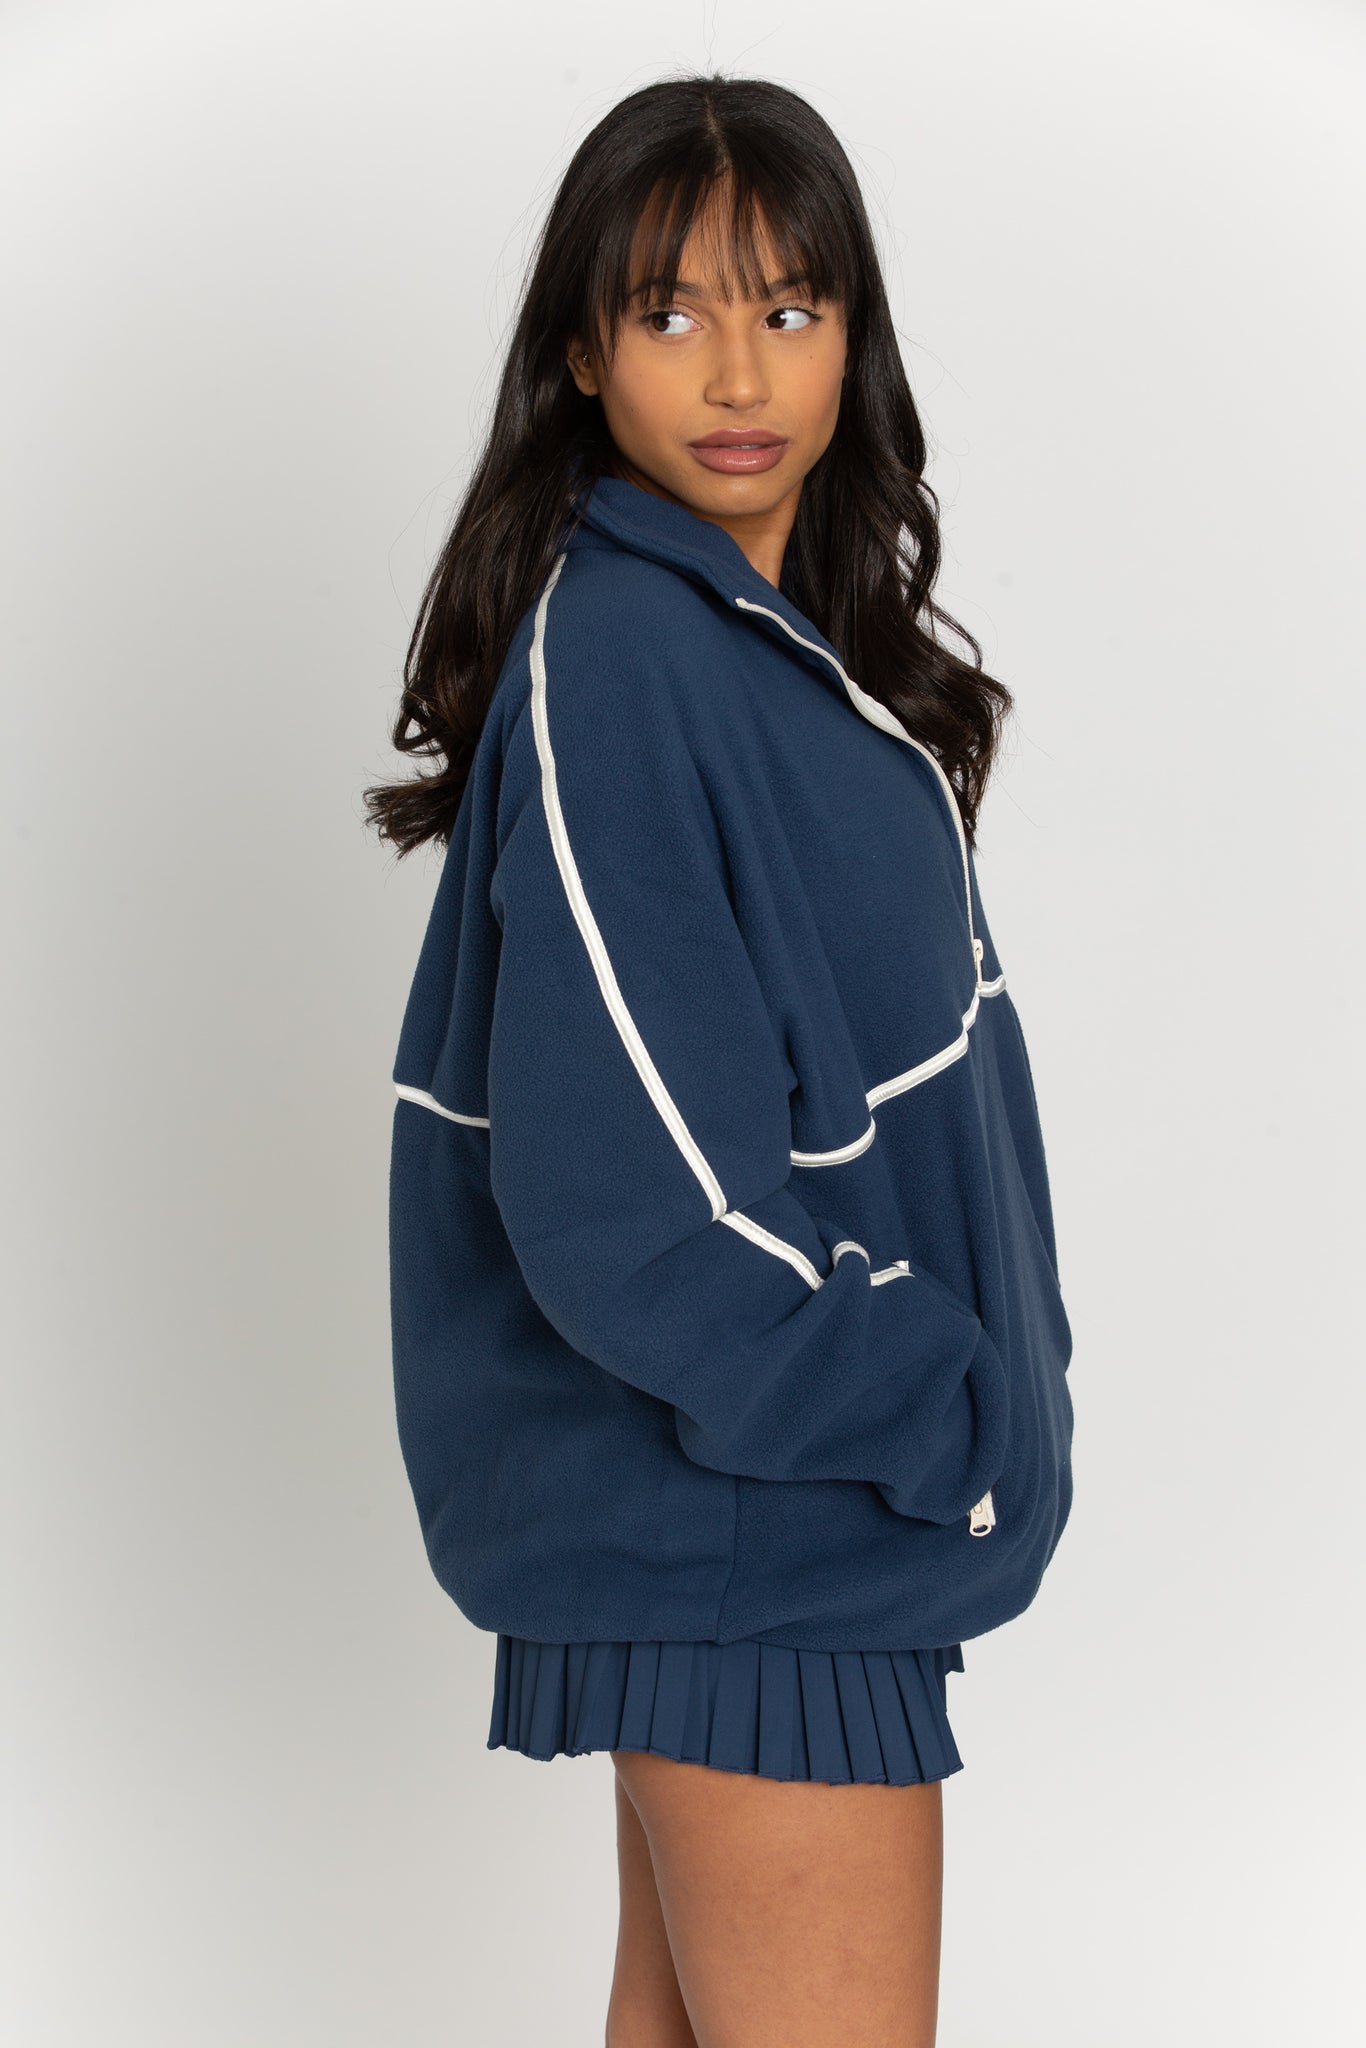 This navy minimalistic half-zip pullover is the perfect way to stay warm and comfortable while looking stylish. The lightweight material is perfect for layering over any outfit and the half-zip design gives it a modern twist.